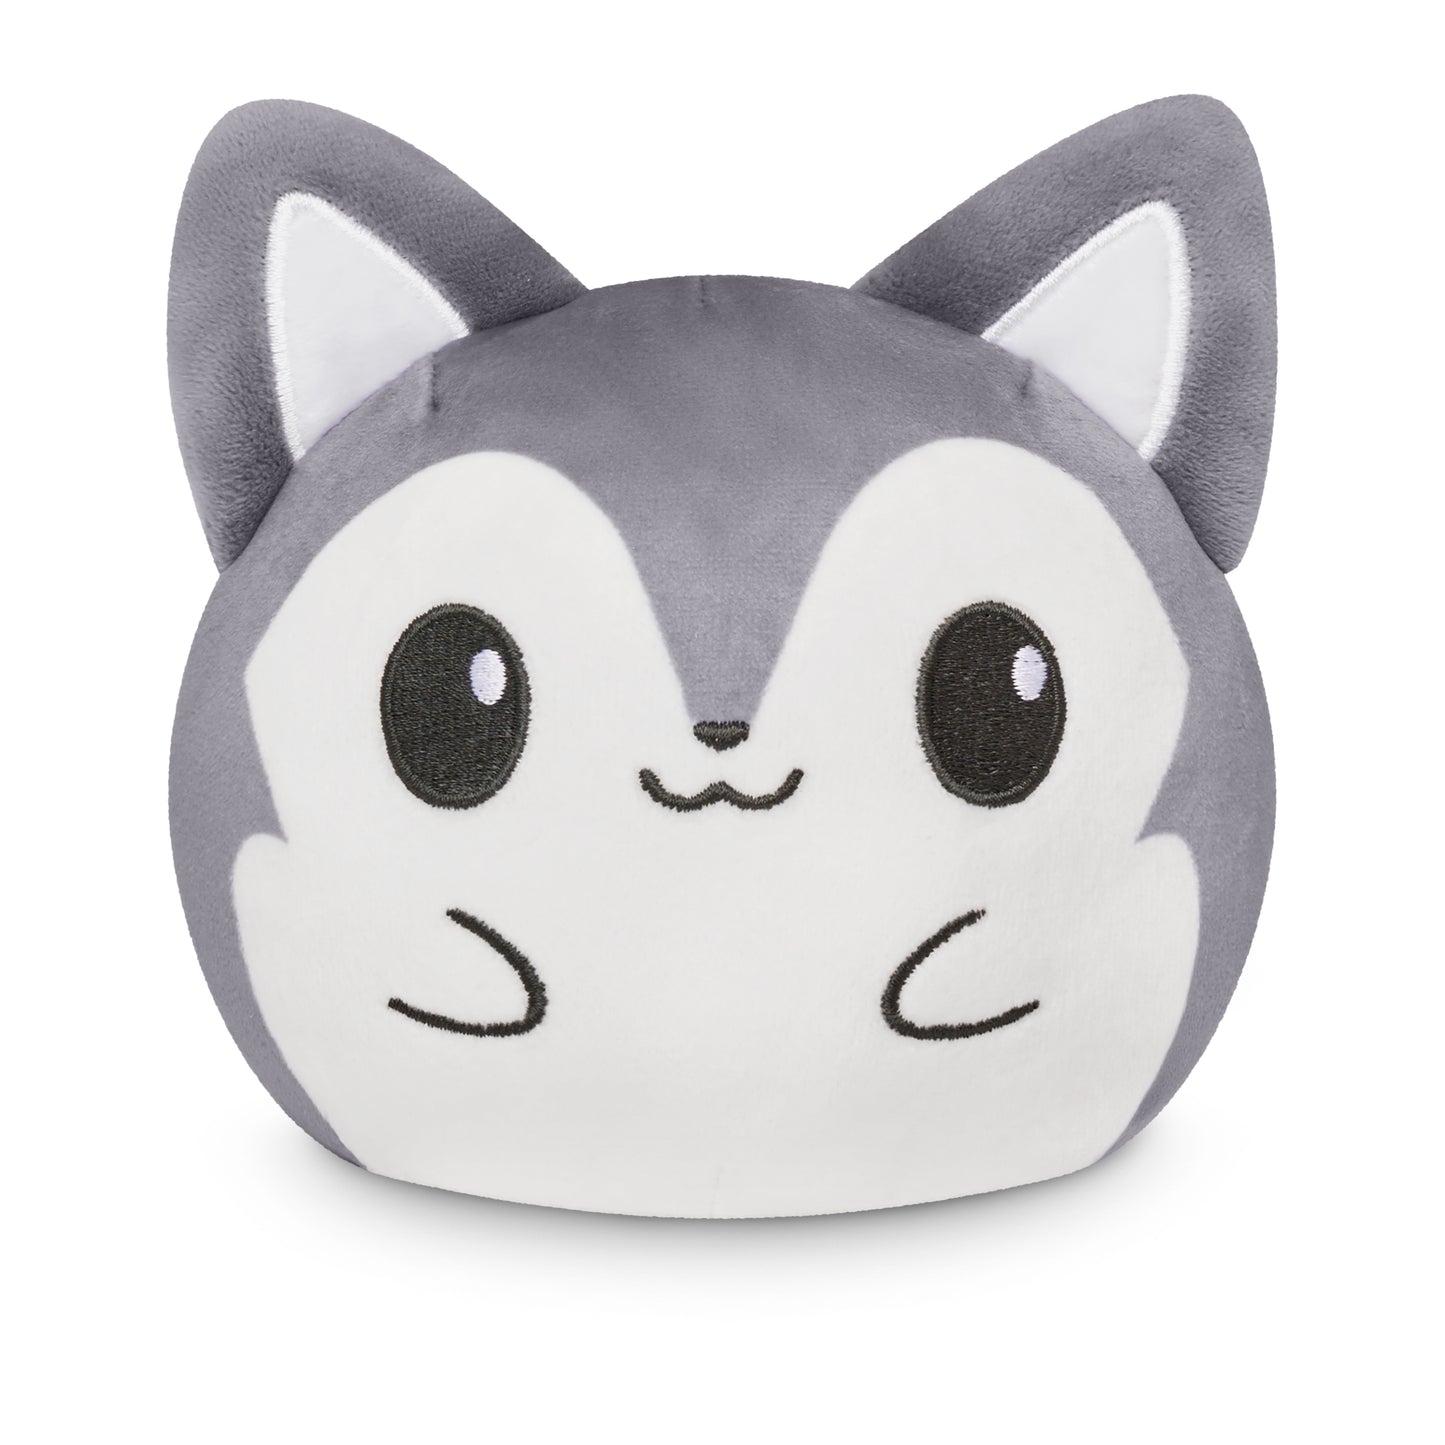 TeeTurtle's Plushiverse Fierce Wolf 4" Reversible Plushie designed to resemble a cartoon-style gray and white cat face.